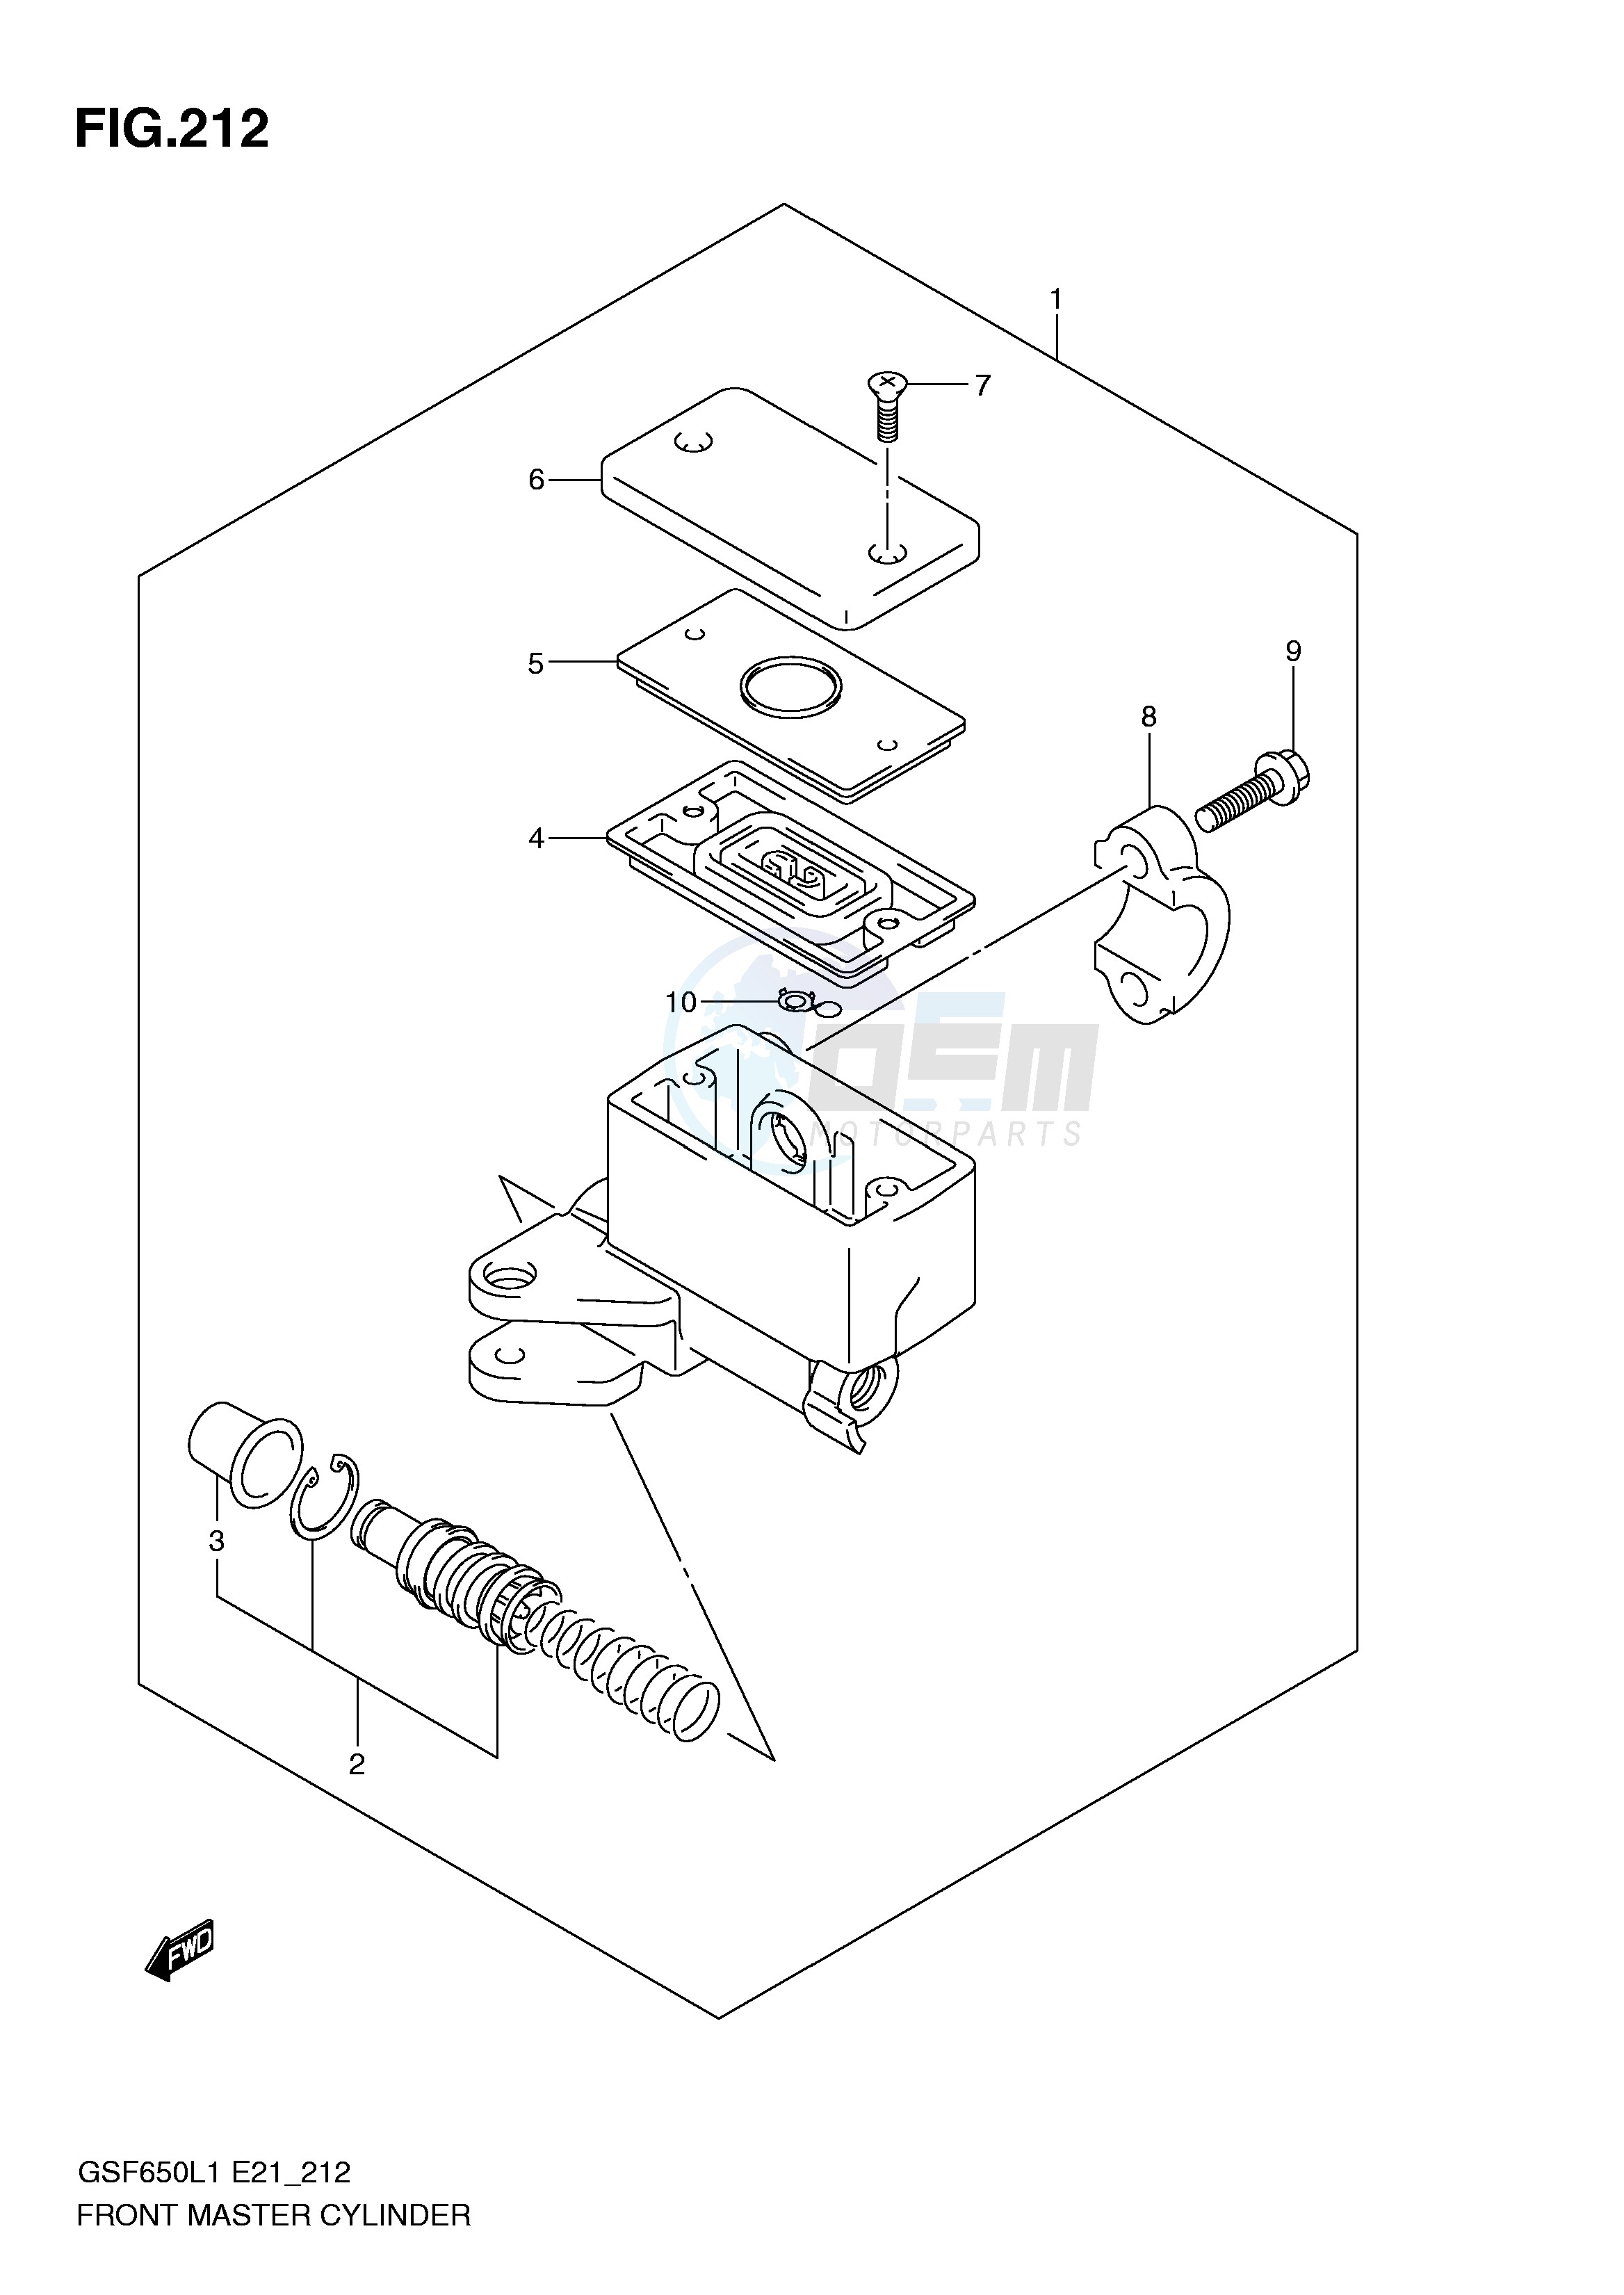 FRONT MASTER CYLINDER (GSF650SUAL1 E21) blueprint